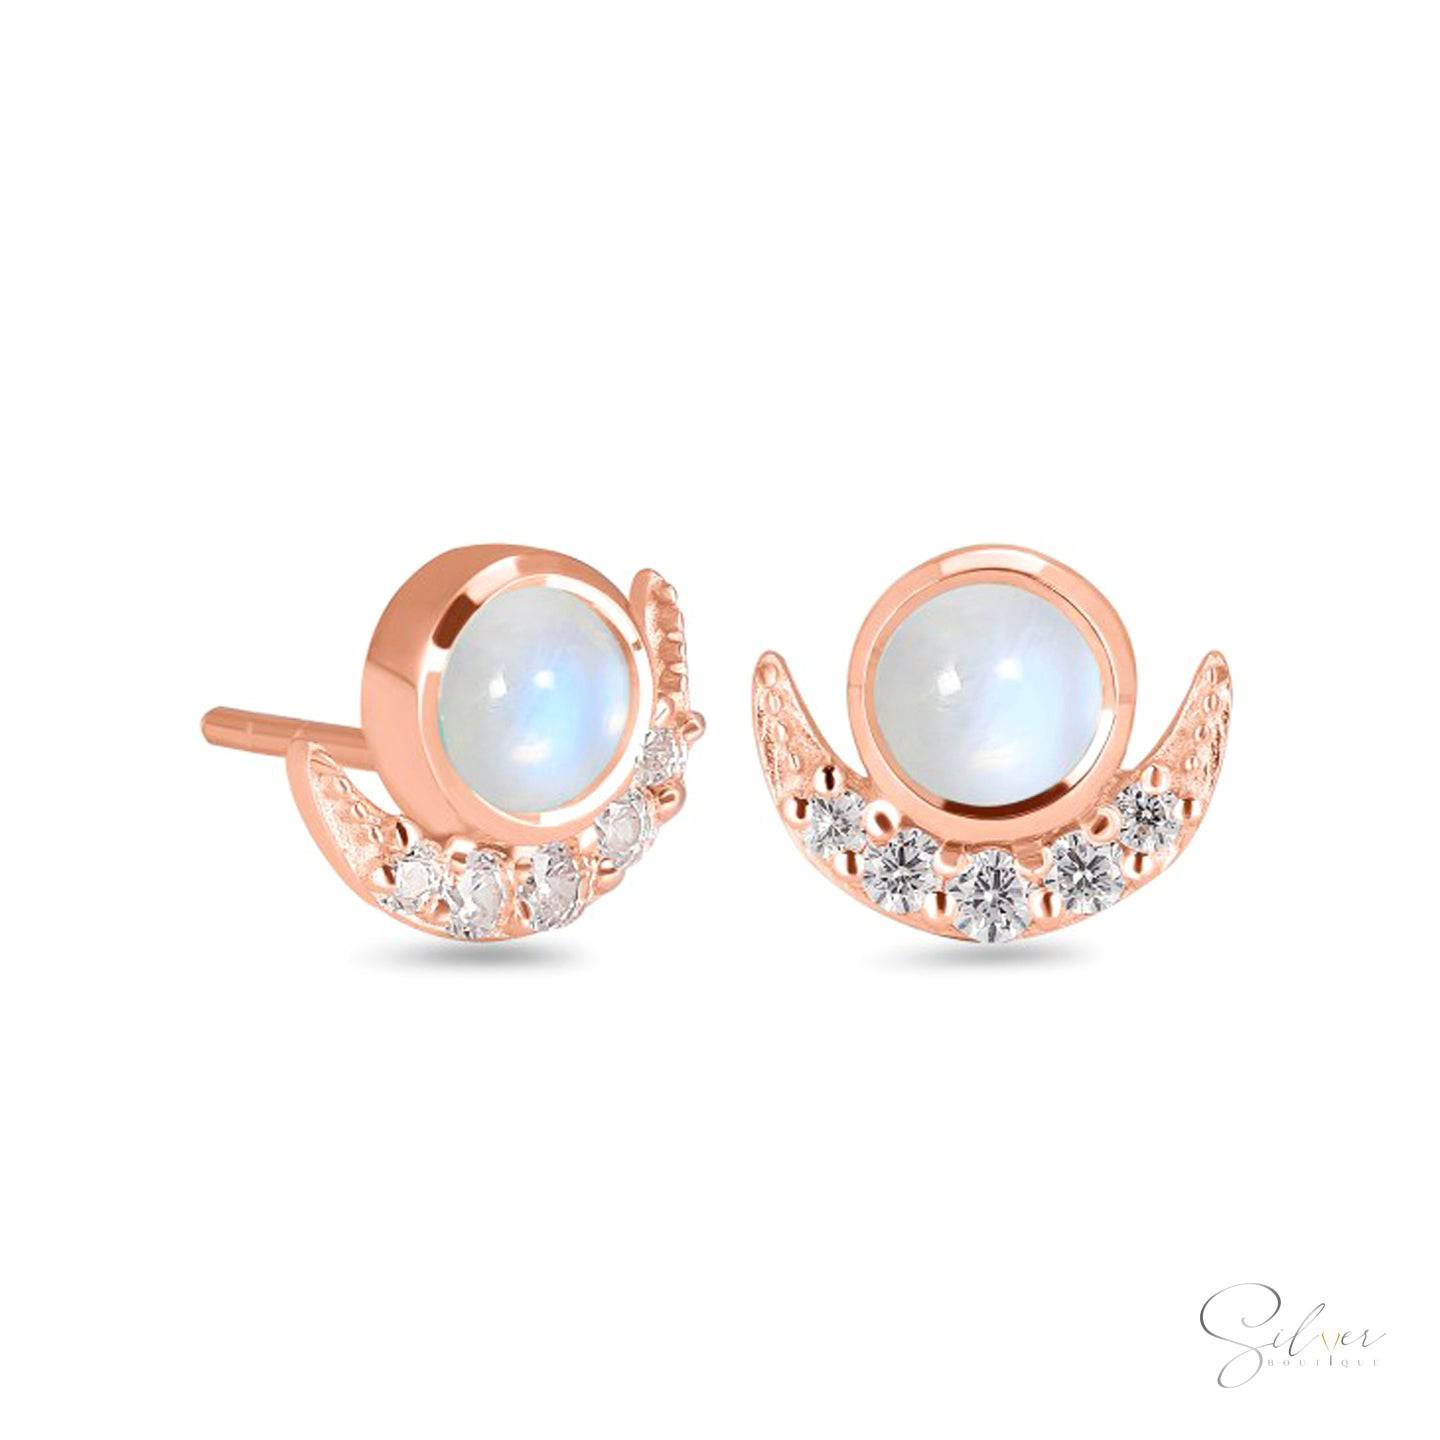 Moonstone Earring - Silver Ocean-Inspired Jewelry for Her - Baza Boutique 